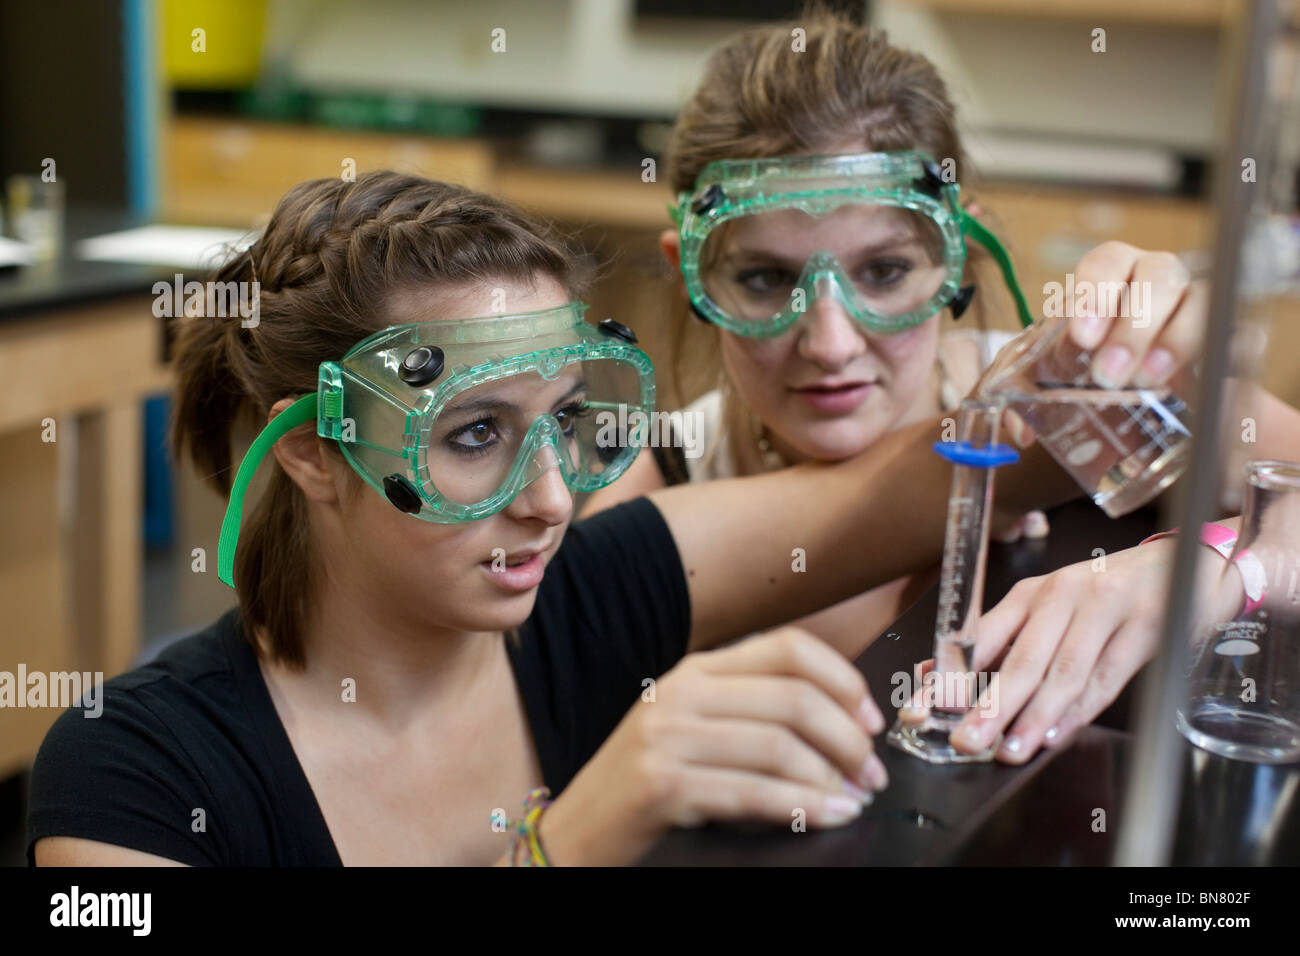 Female high school students wearing safety goggles pour liquid from a beaker into a graduated cylinder during chemistry class Stock Photo